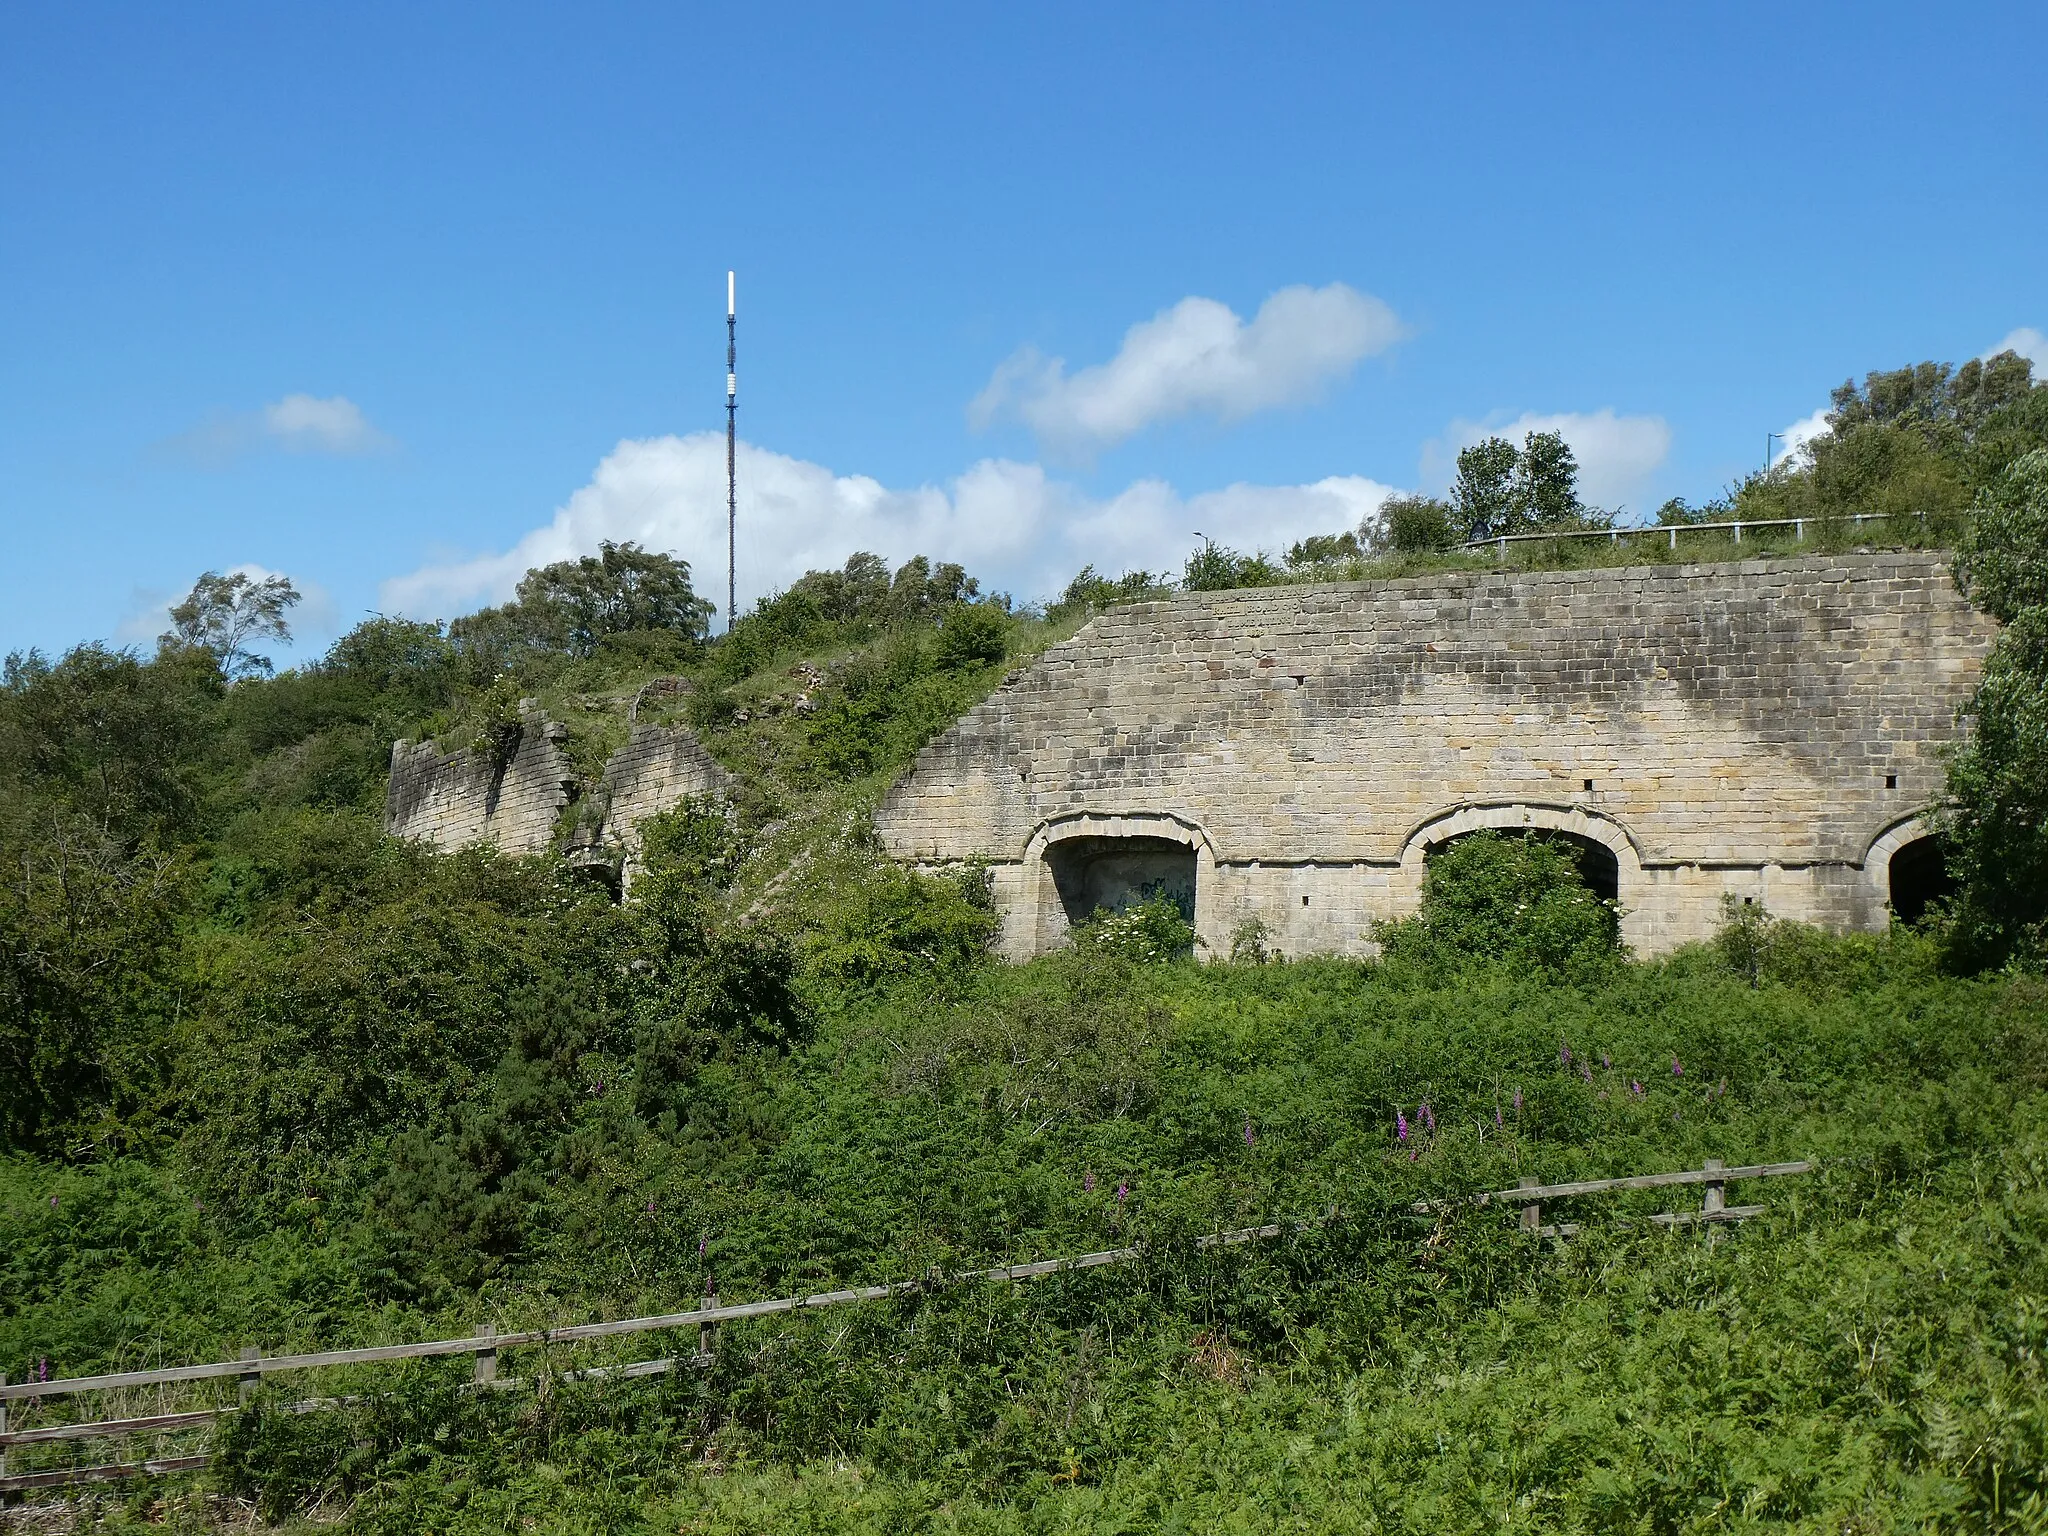 Photo showing: Bantling Lime Kilns at East Castle, Annfiled Plain, with Pontop Pike television transmission mast in the background.